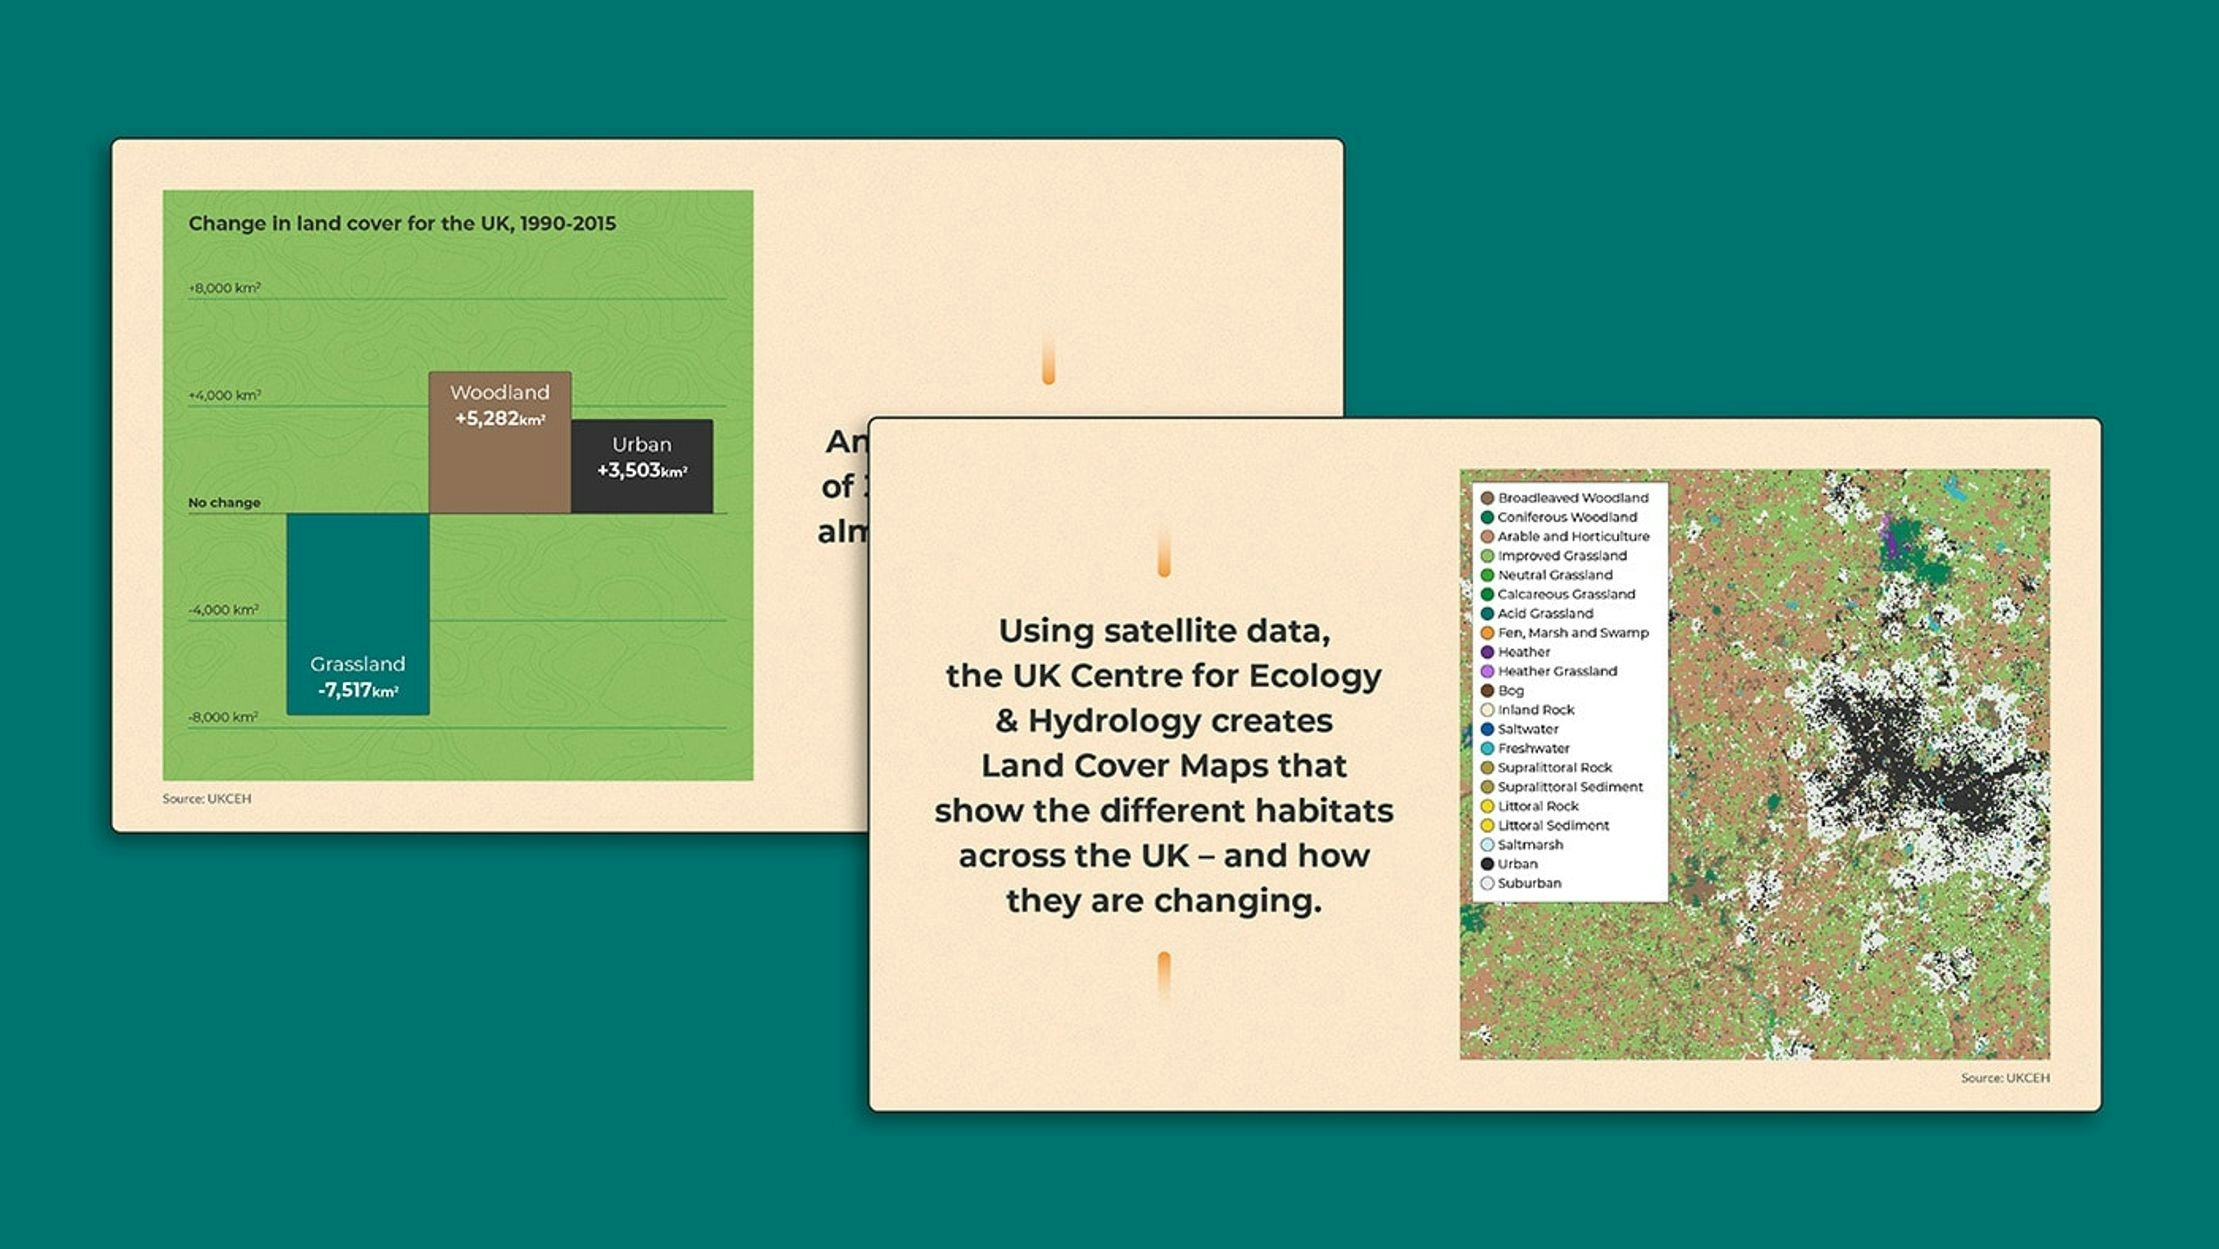 Two stills from the data videos. Both show text with visualizations. One is a bar chart, the other is a satellite map of land cover.